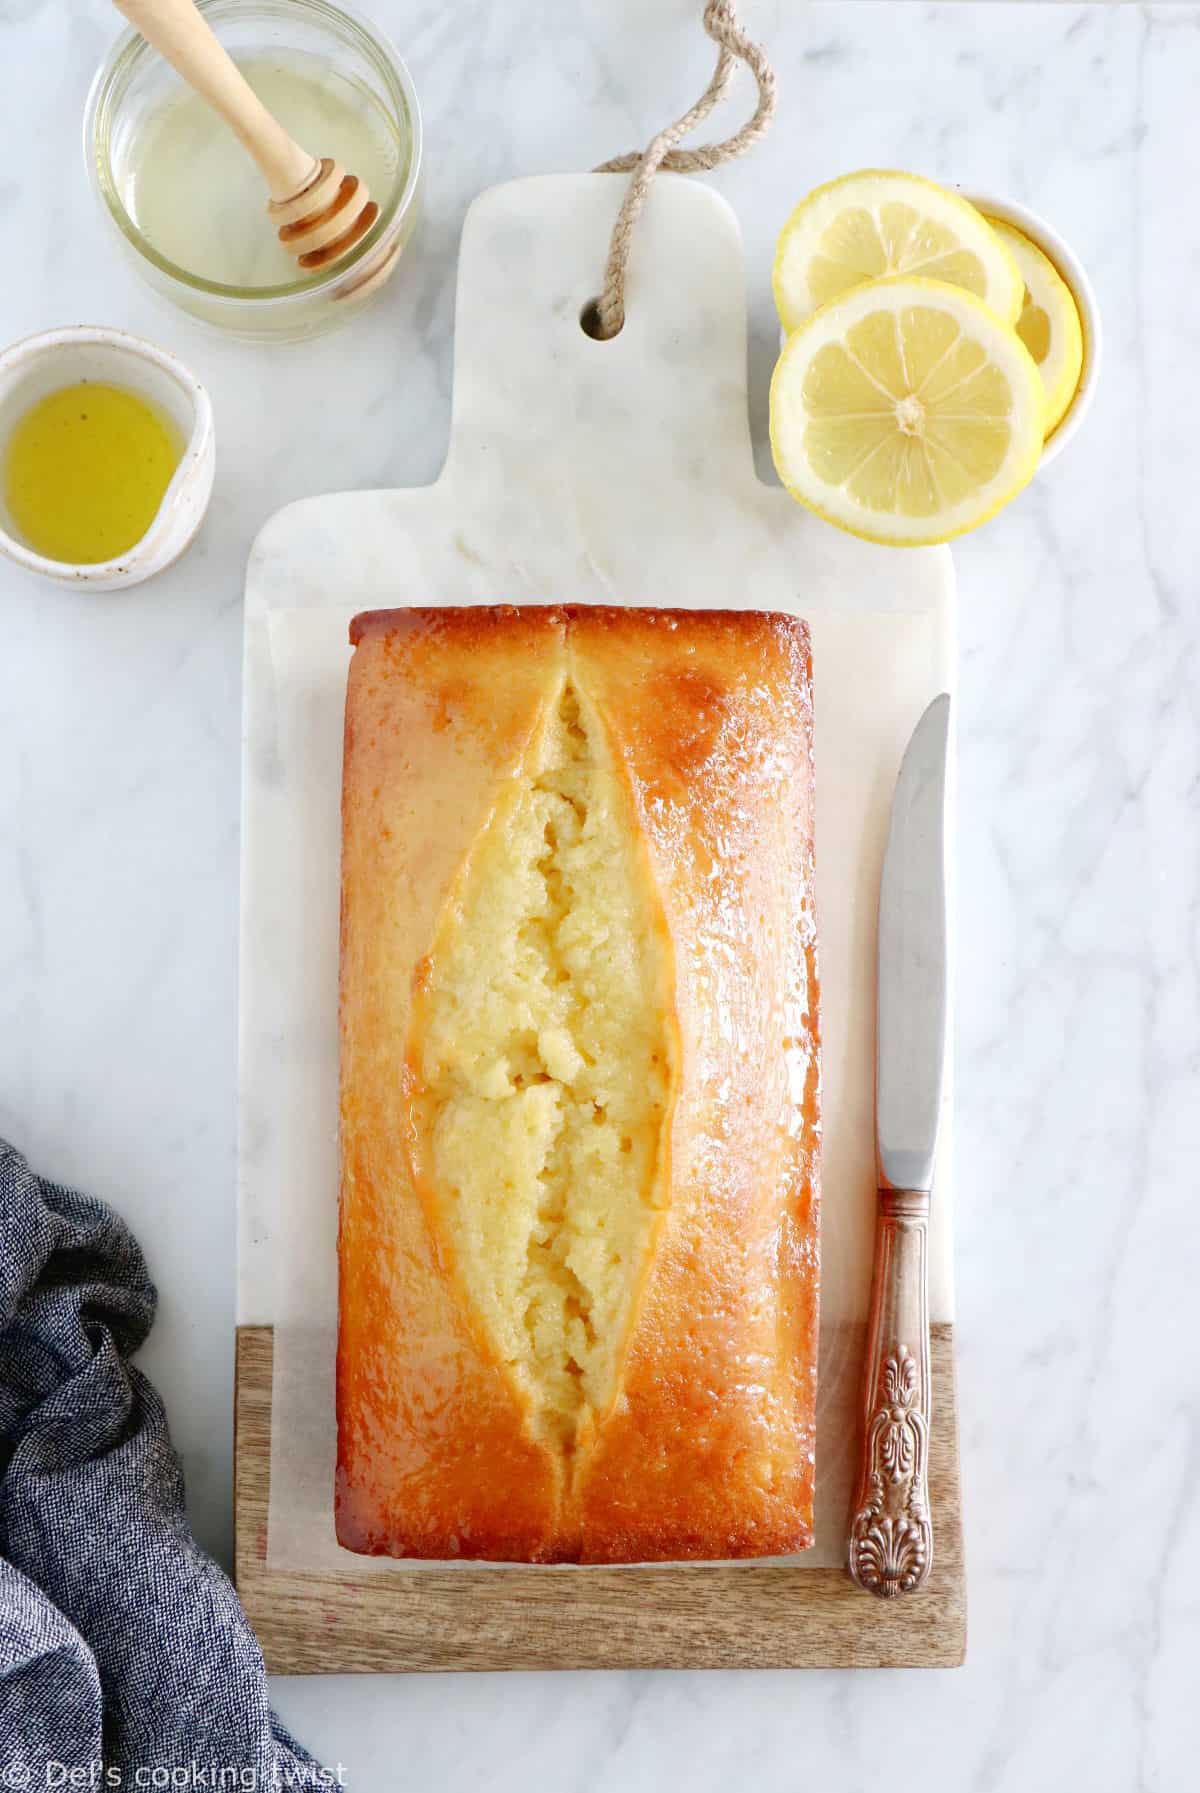 This lemon olive oil loaf cake is perfection. Rich, dense and loaded with subtle lemony flavors, it's the quick and easy dessert you need to have at hand anytime of the year!